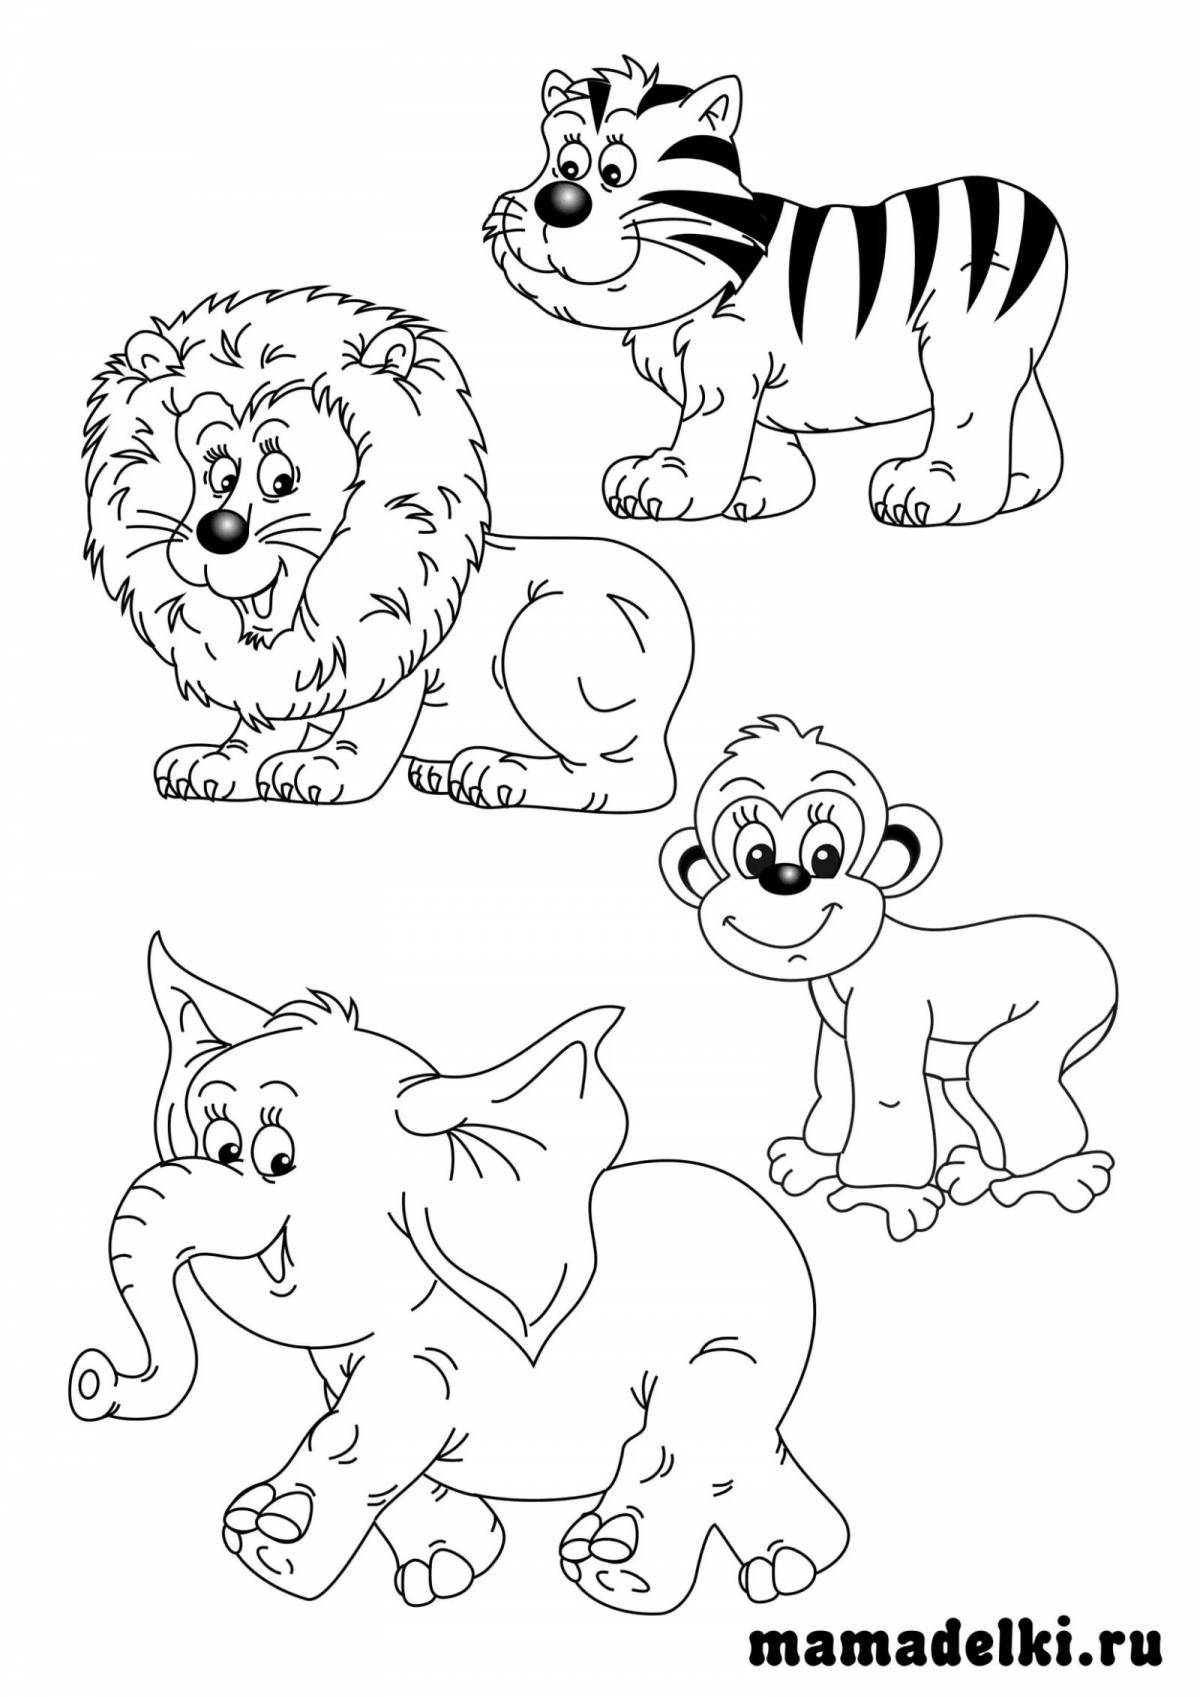 Glowing animal coloring pages for kids 5-6 years old